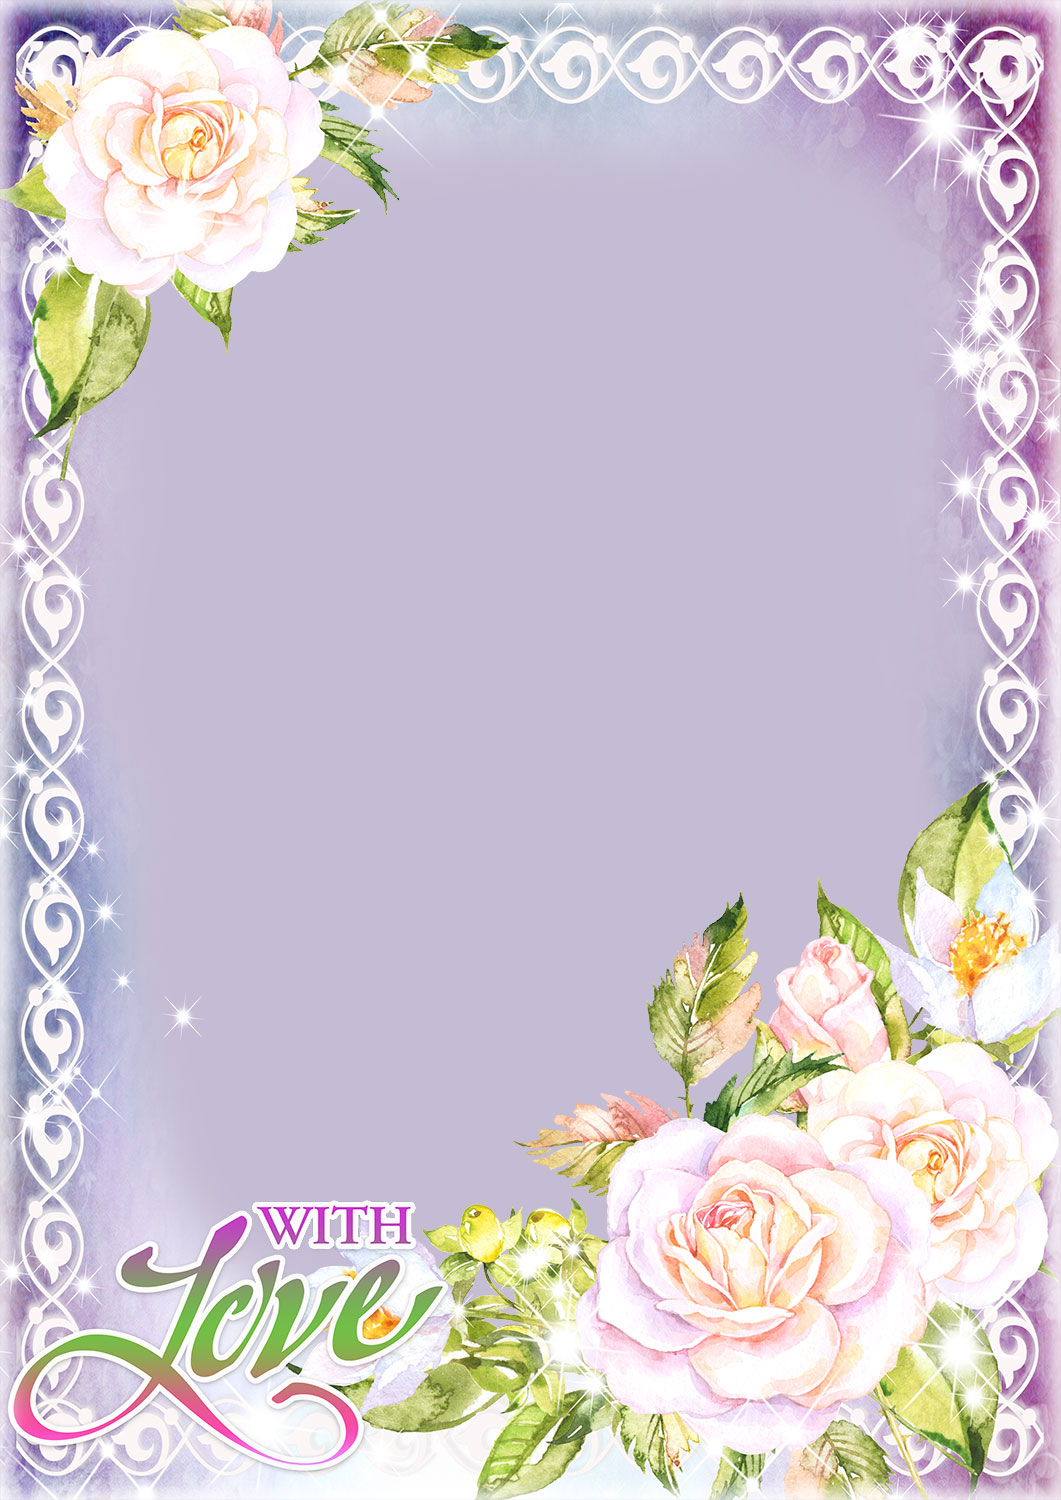 ≡ Love Photo Frames. Pff Me And You (100+ frames)